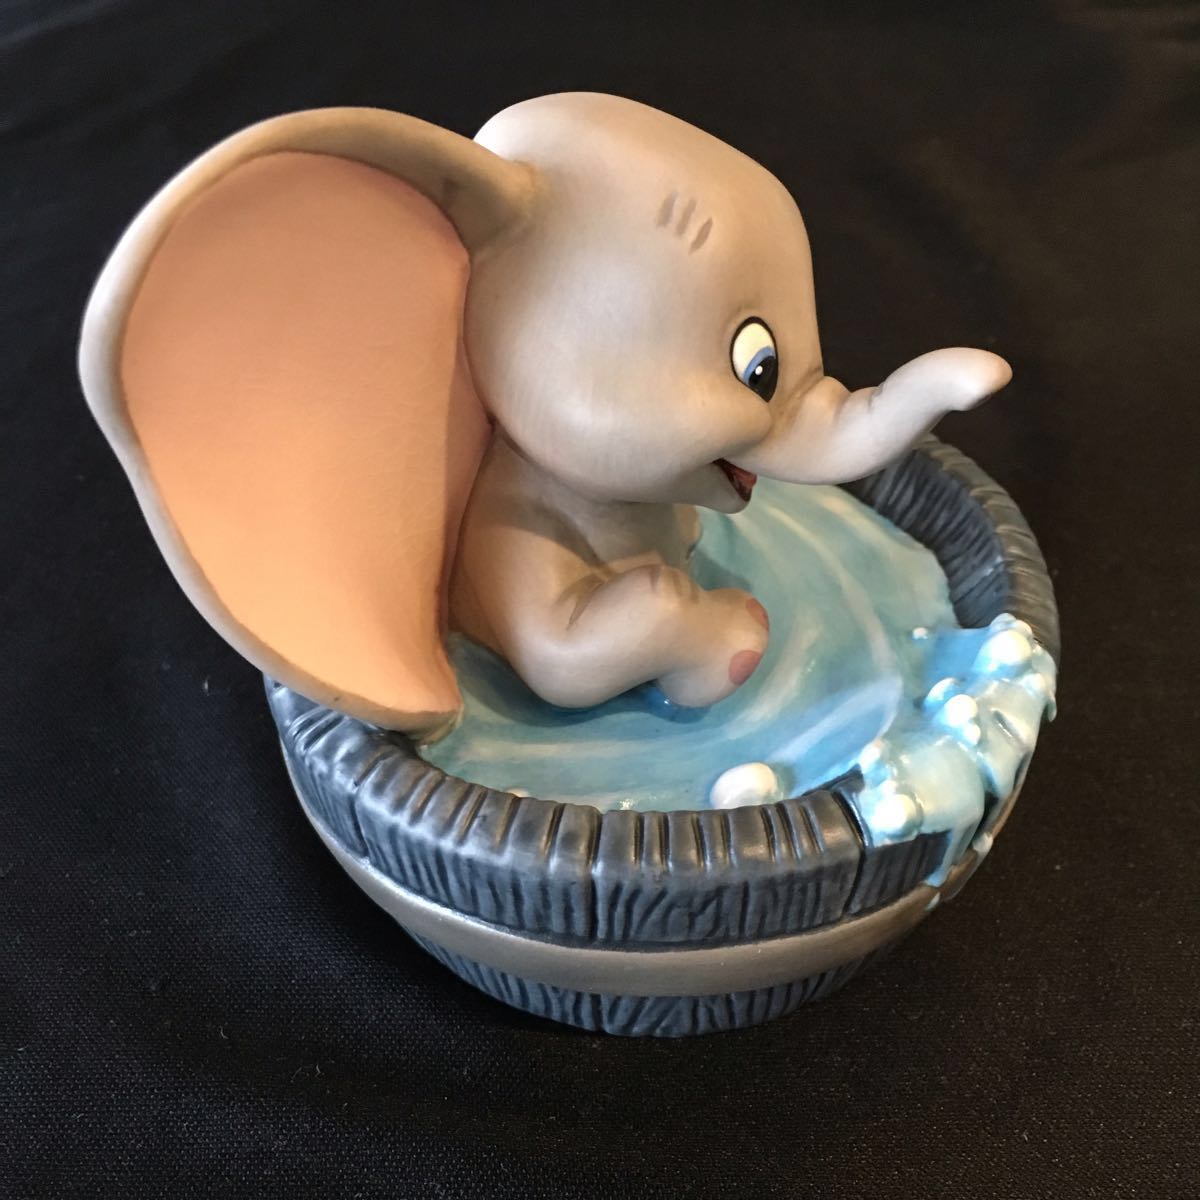  Dumbo *Dumbo Simply Adorable *Disney WDCC *woruto Disney Classic collection * member gift 1995